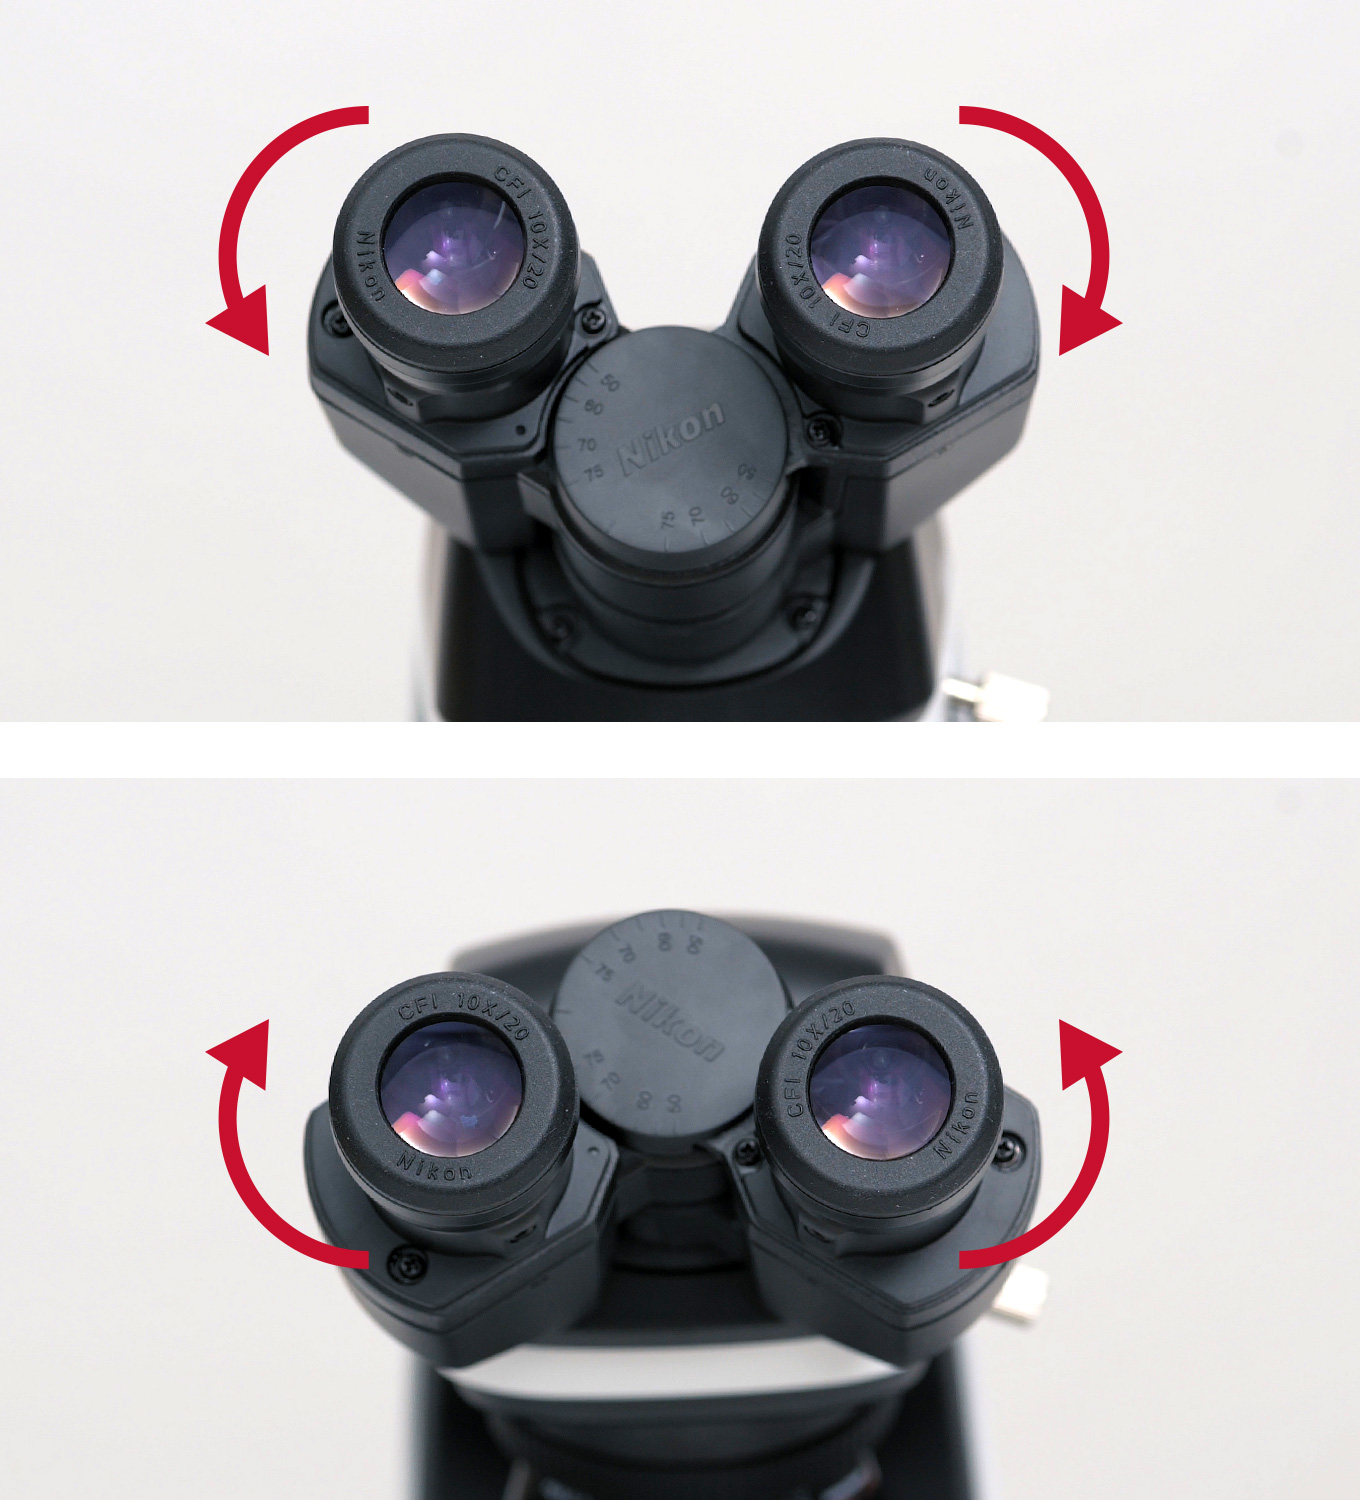 Adjust the positioning of the eyepiece lens